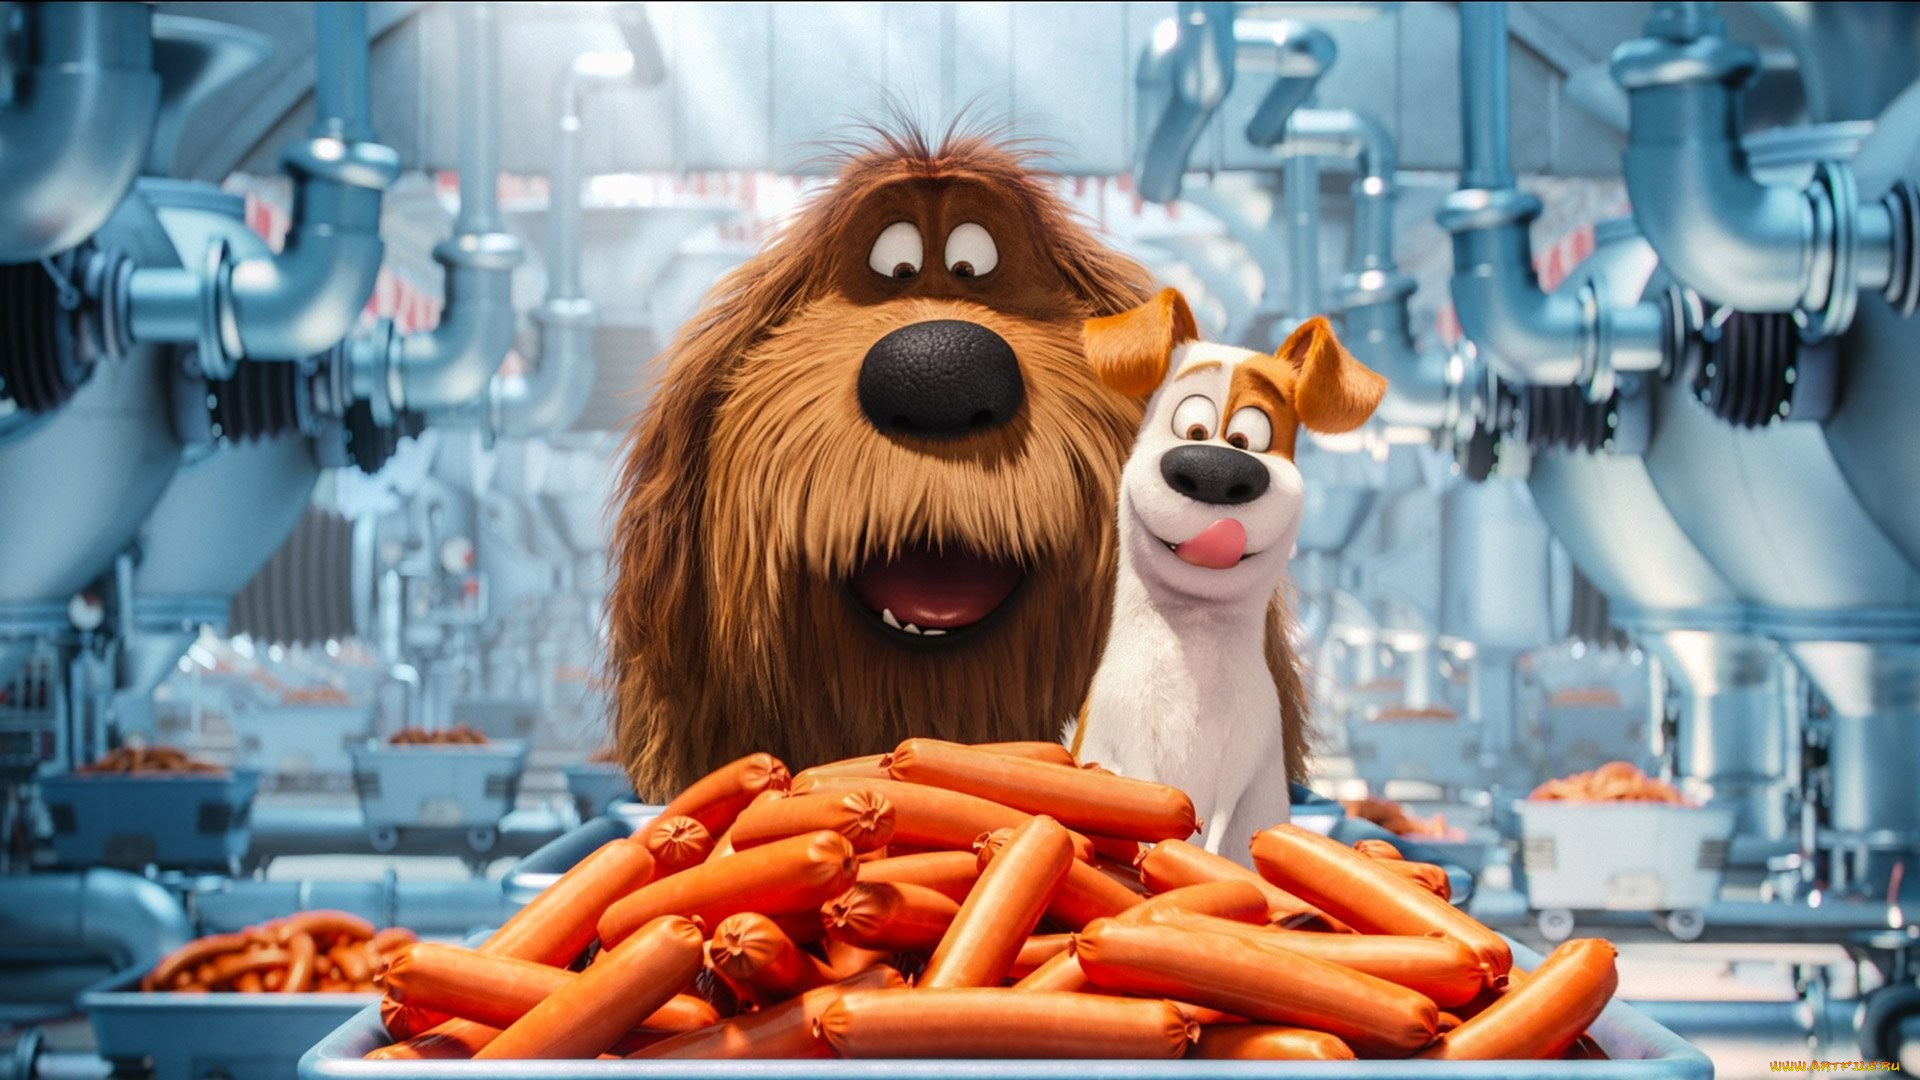 , the secret life of pets, sausage, party, dog, manufactures, pet, graphic, animation, the, secret, life, of, pets, comedy, duke, cartoon